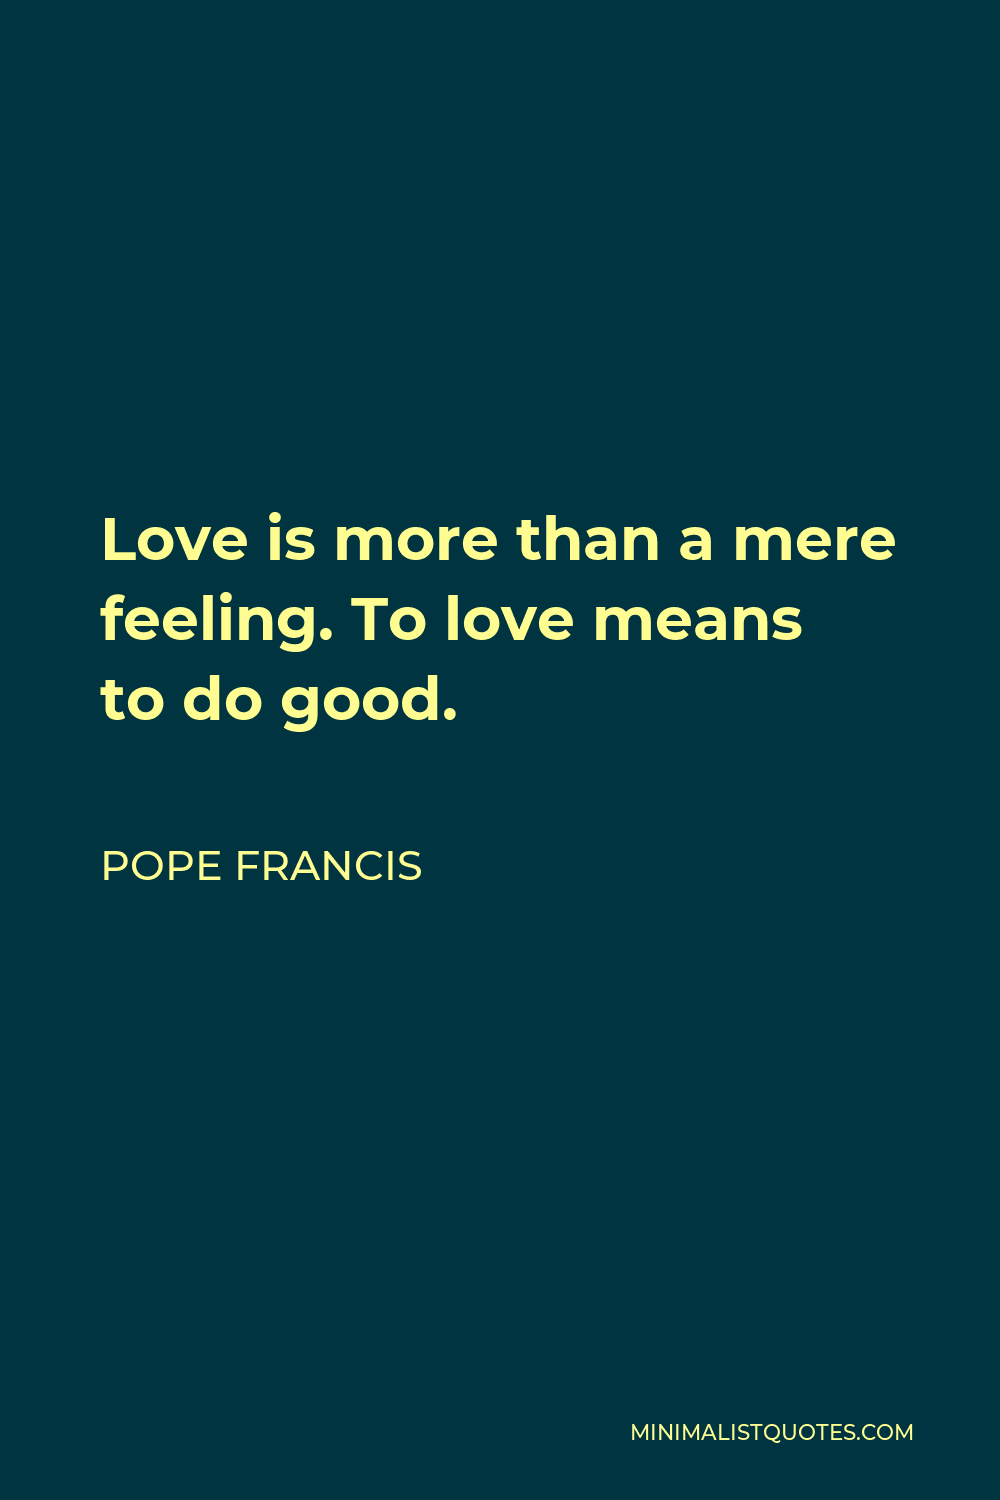 Pope Francis Quote - Love is more than a mere feeling. To love means to do good.